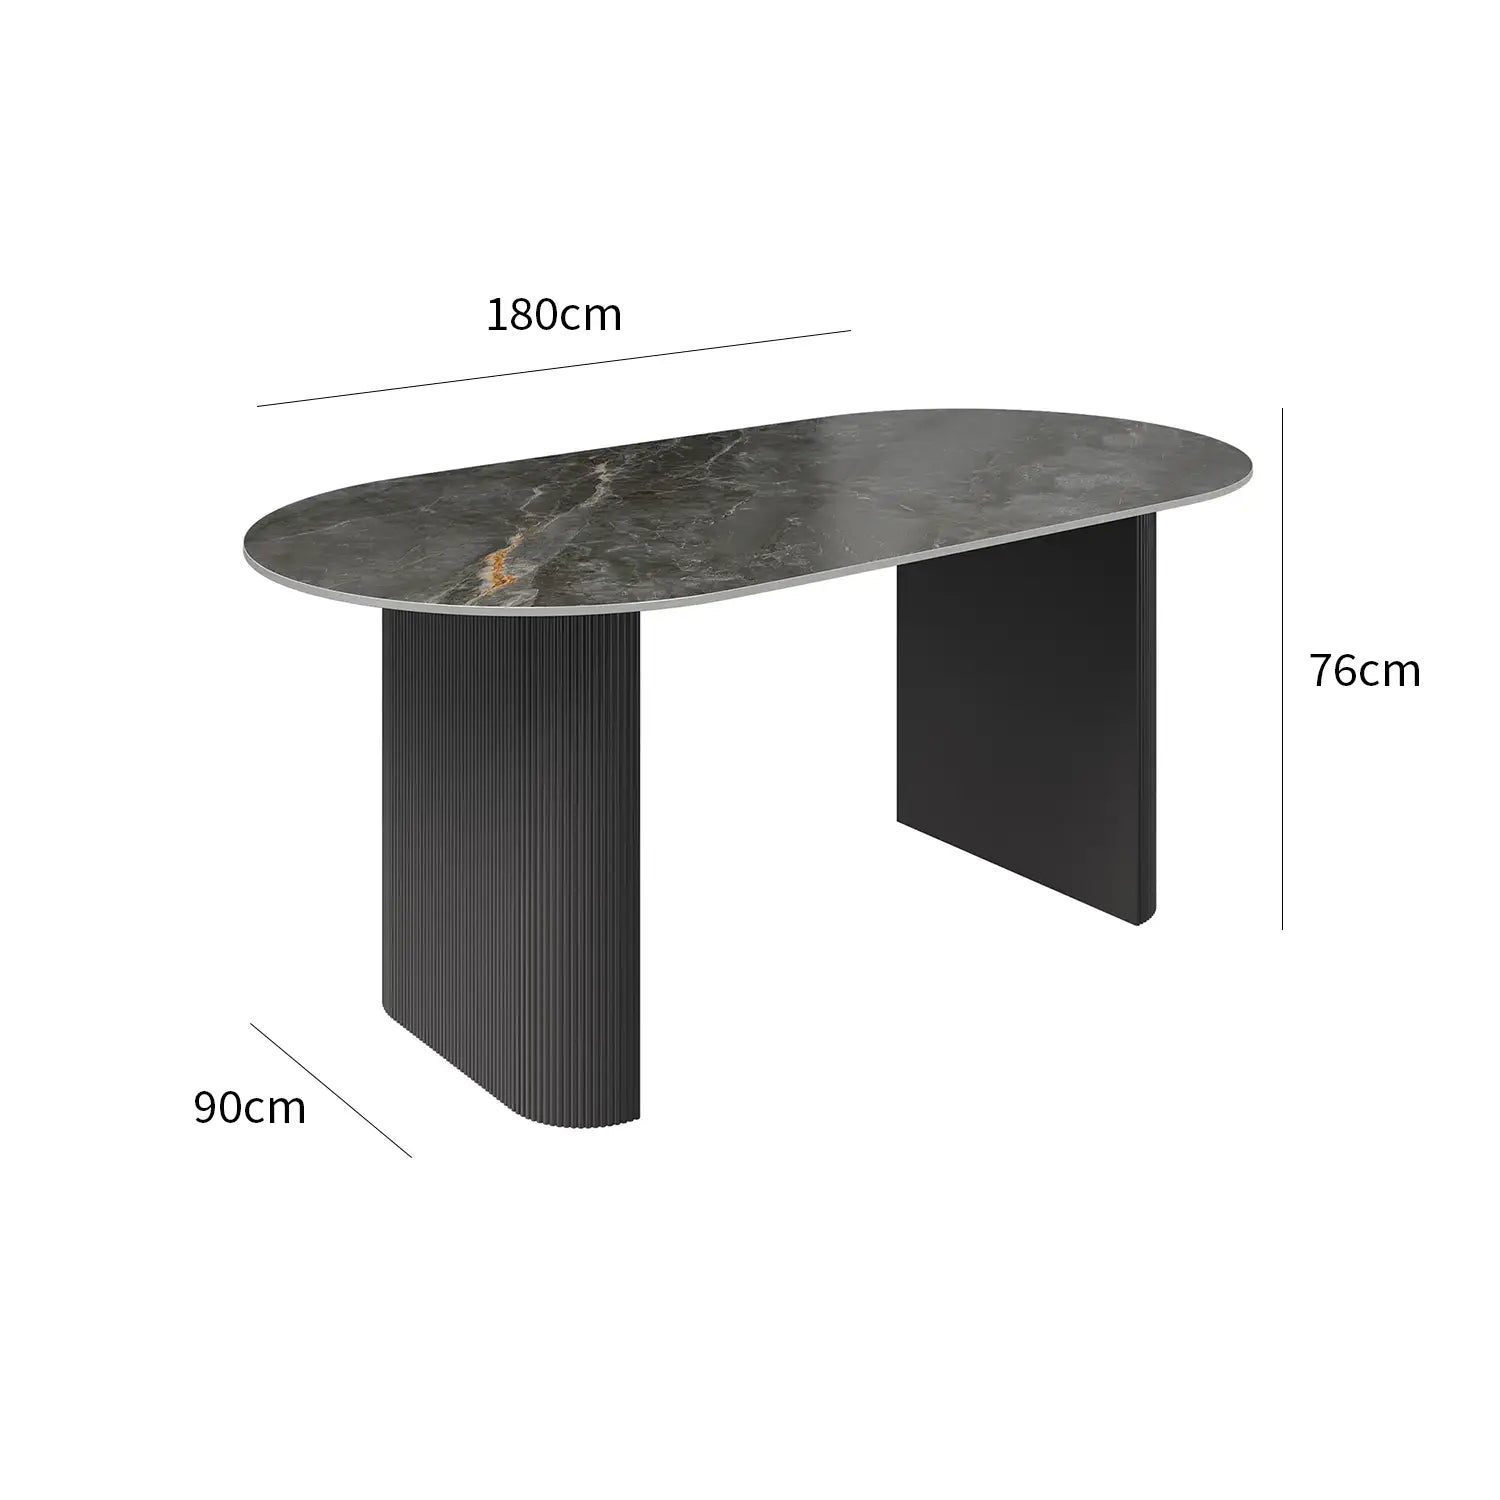  Cartier 180cm Oval Gloss Grey Ceramic Dining Table